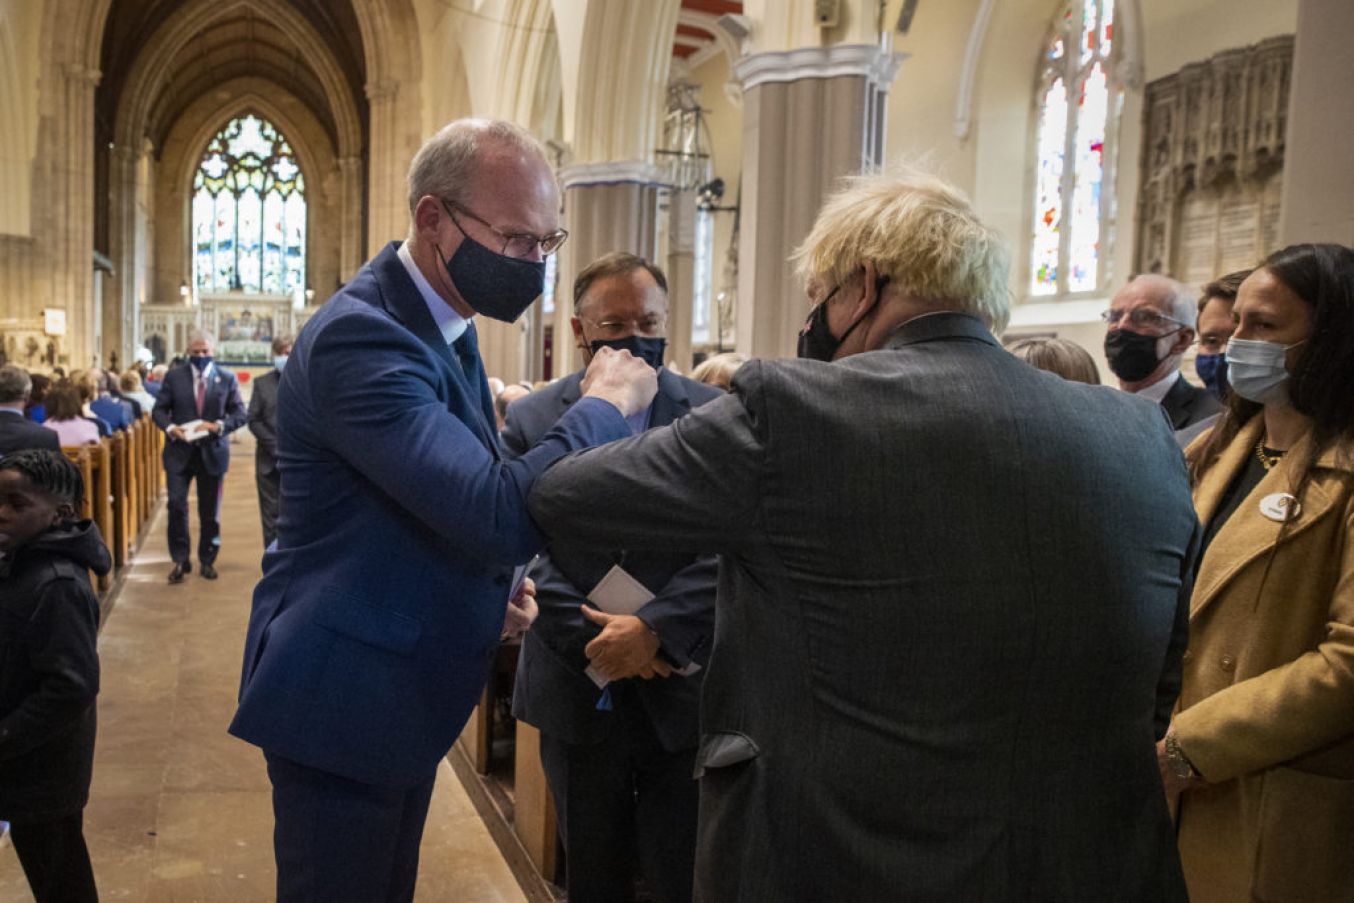 Minister For Foreign Affairs Simon Coveney Meets British Prime Minister Boris Johnson During A Service To Mark The Centenary Of Northern Ireland In Armagh. Photo: Pa